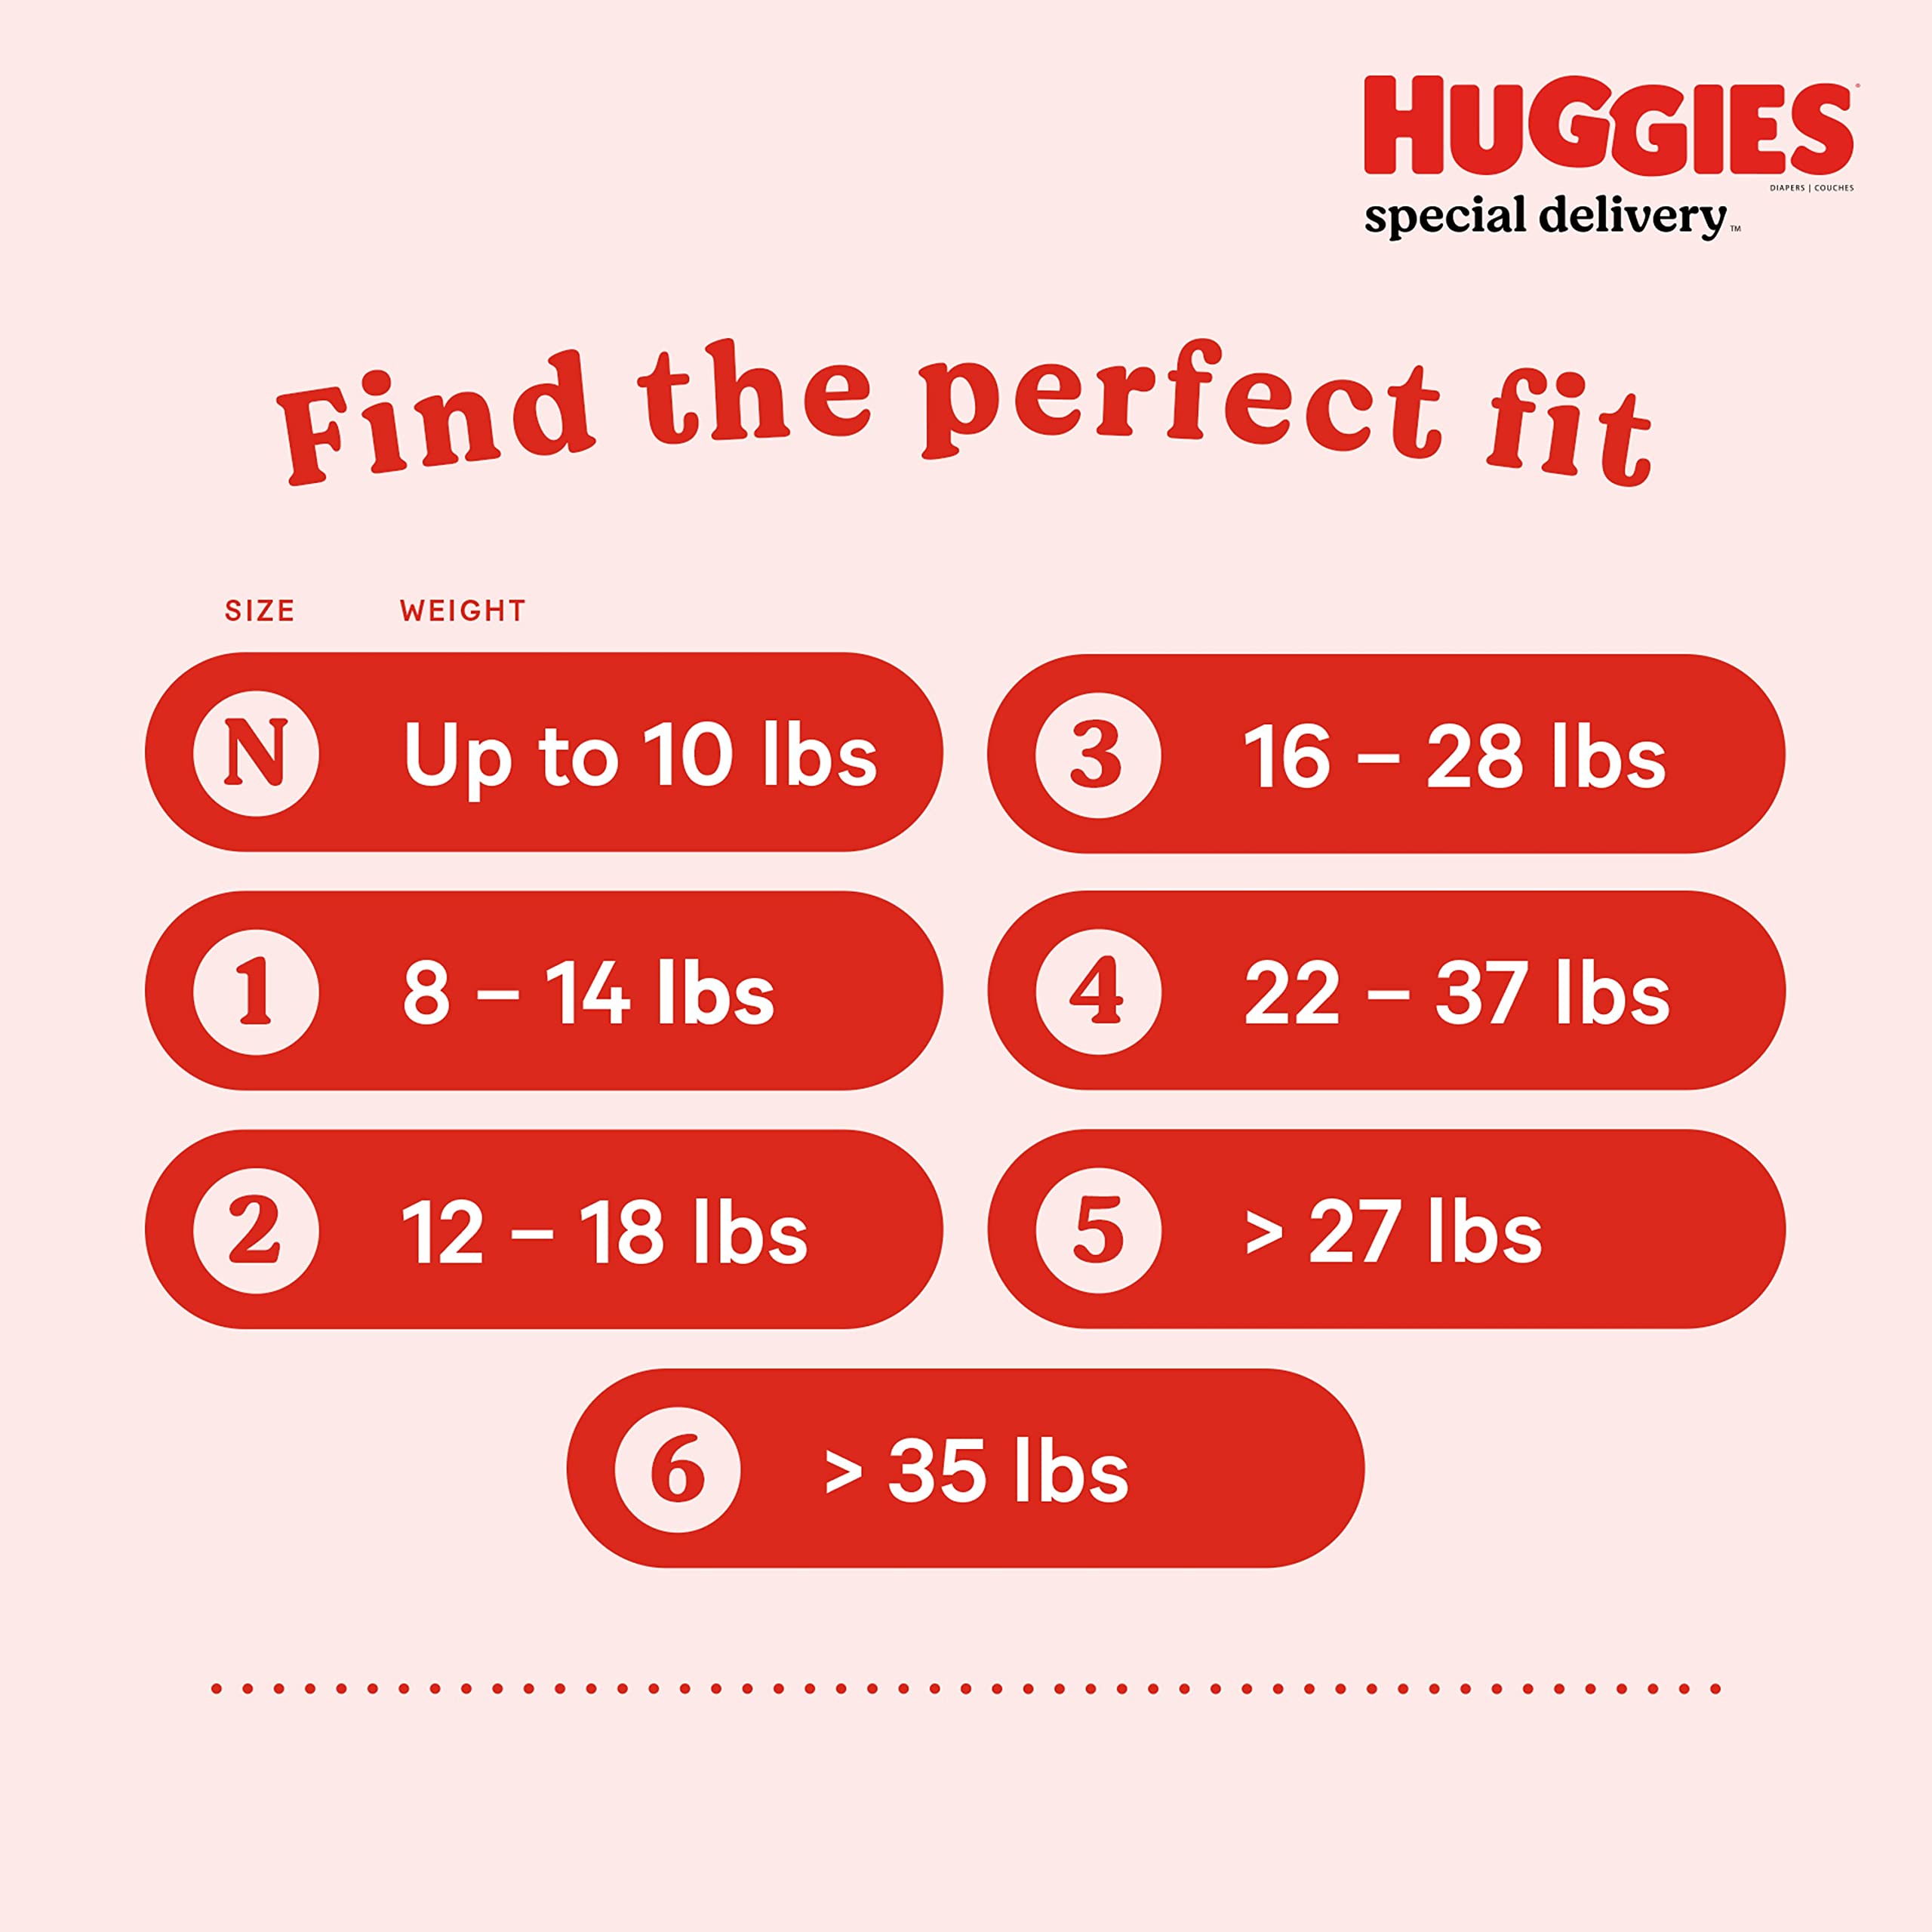 Huggies Special Delivery Hypoallergenic Baby Diapers Size 4 (22-37 lbs), 140 Ct, Fragrance Free, Safe for Sensitive Skin